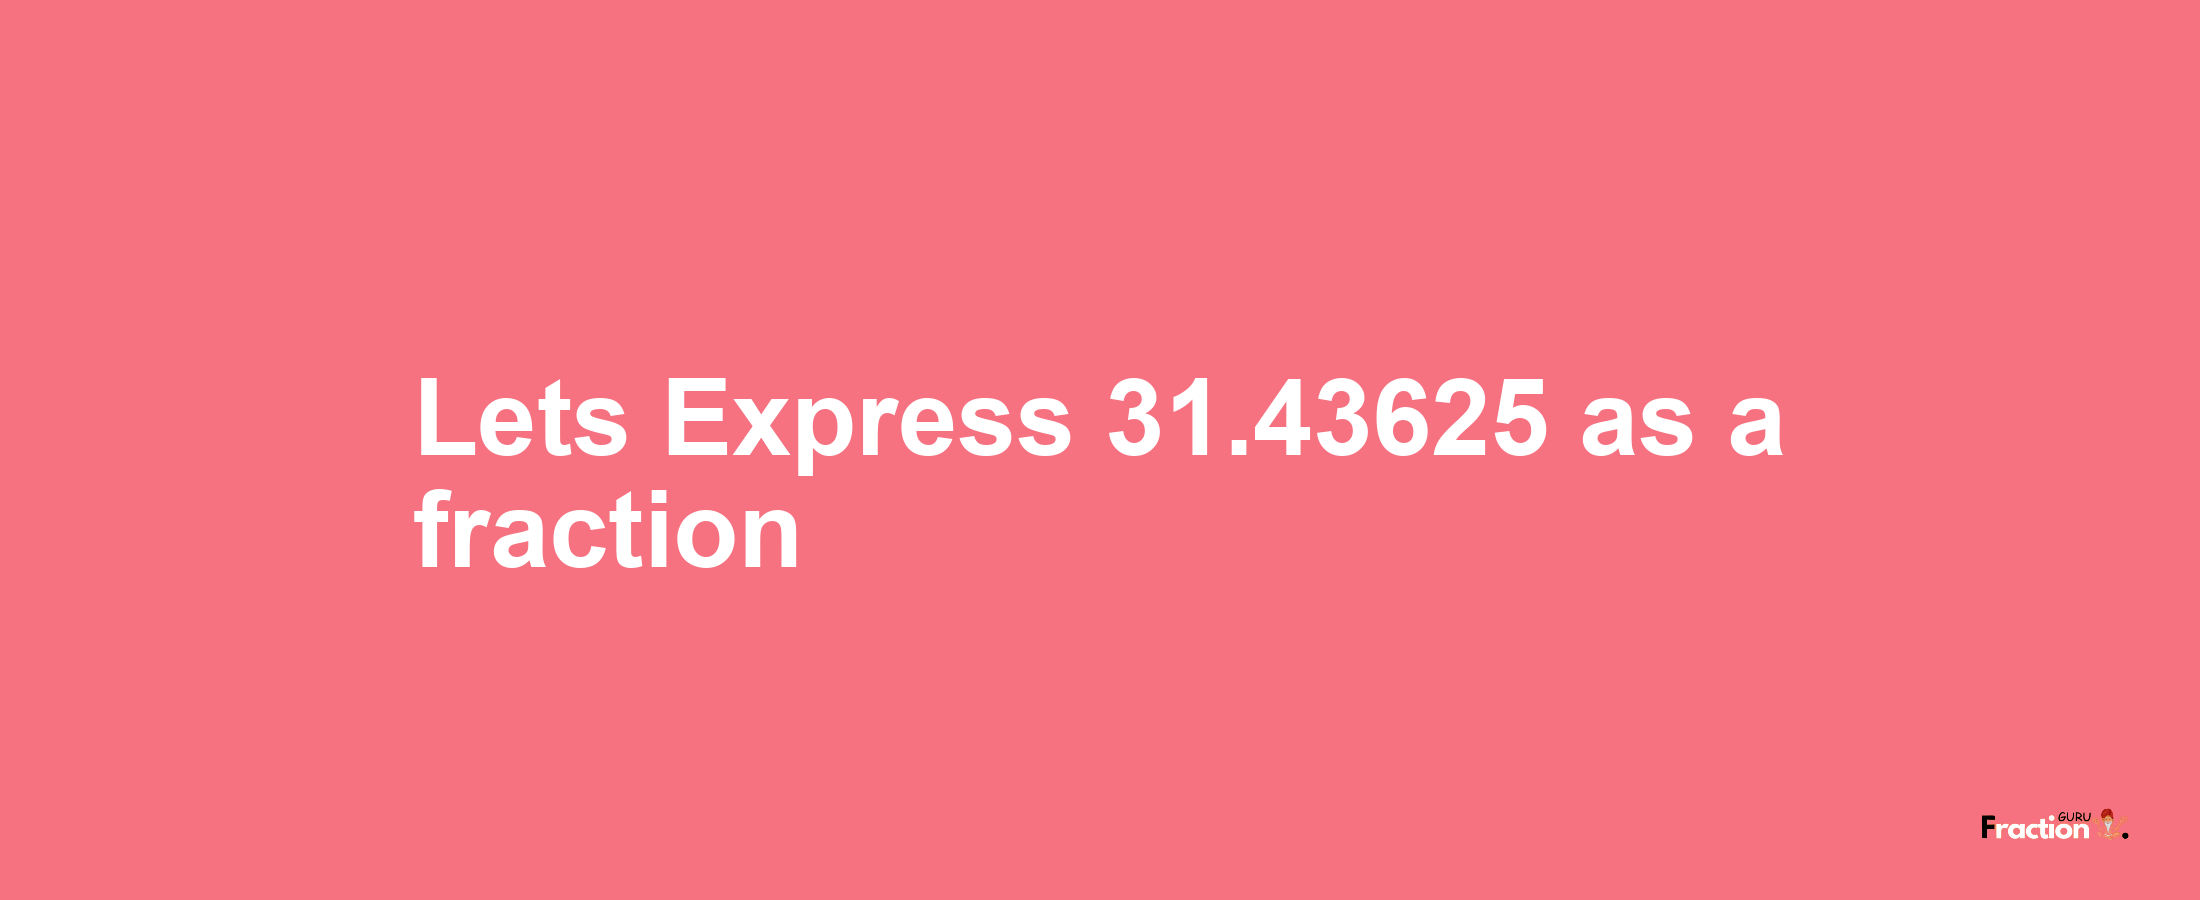 Lets Express 31.43625 as afraction